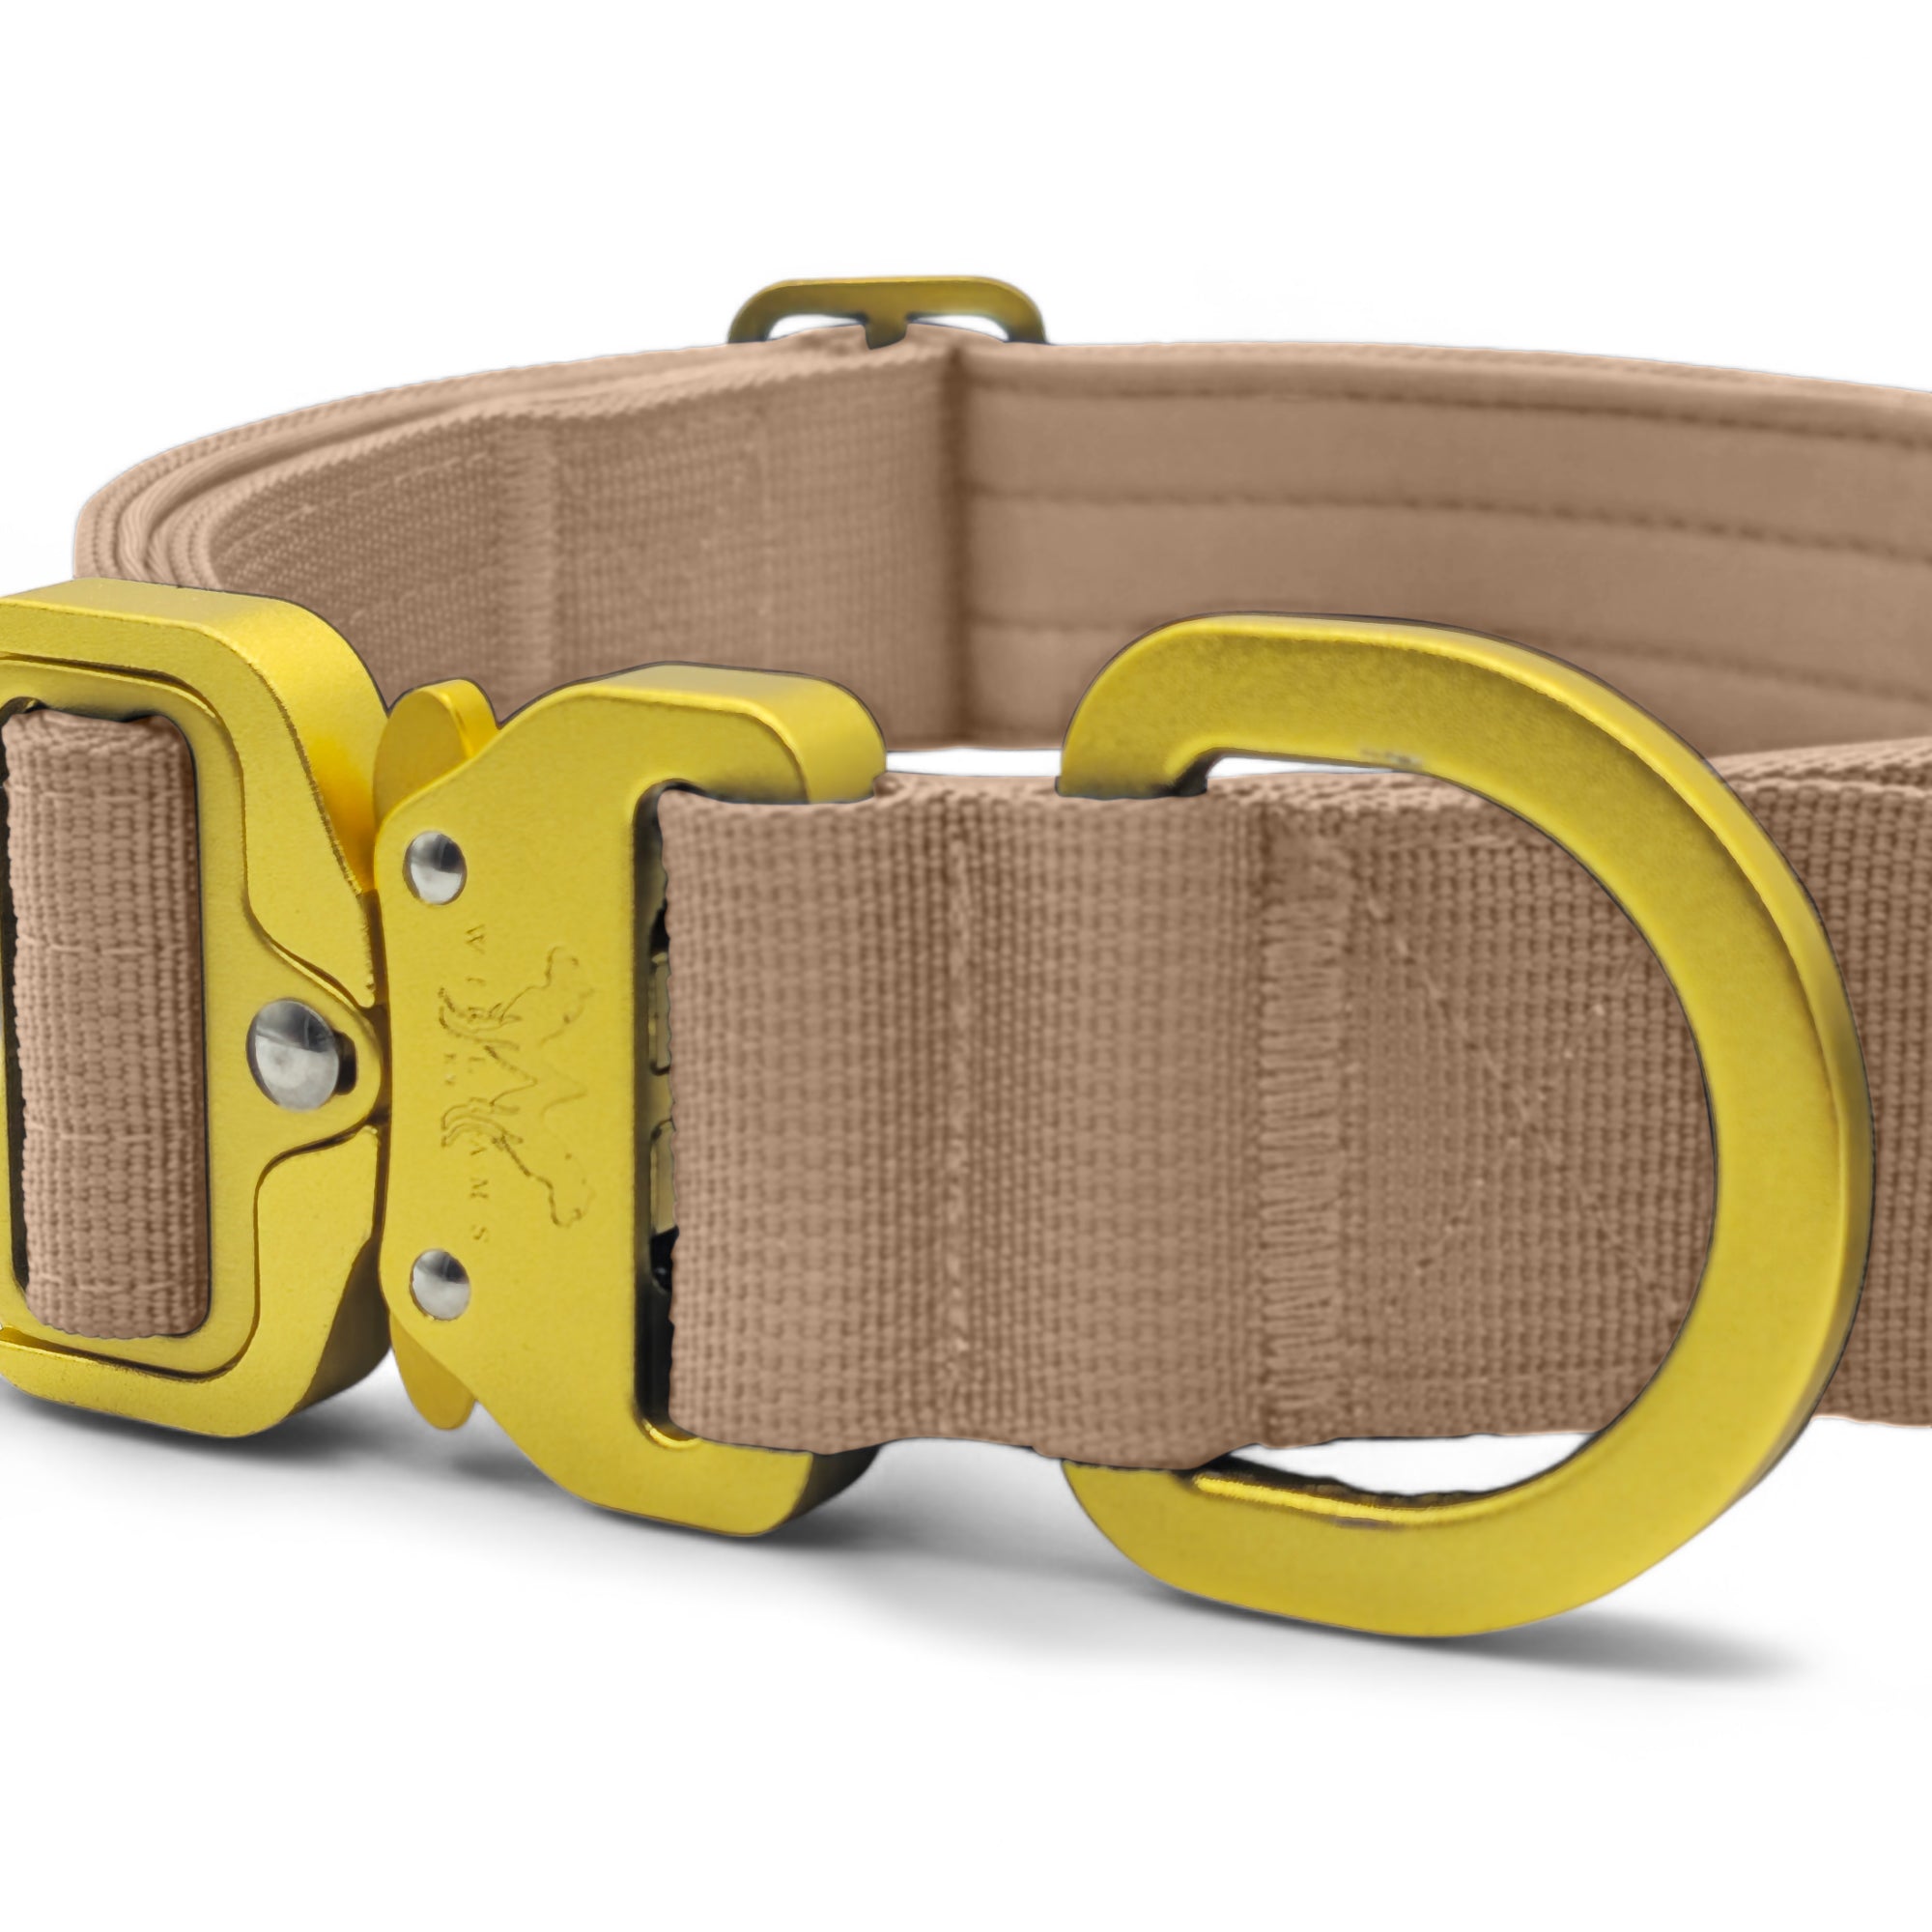 Light Tactical Collar 4CM Military Tan | Quad Stitched Nylon Lightweight Gold Aluminium Buckle + D Ring Adjustable Collar With Handle